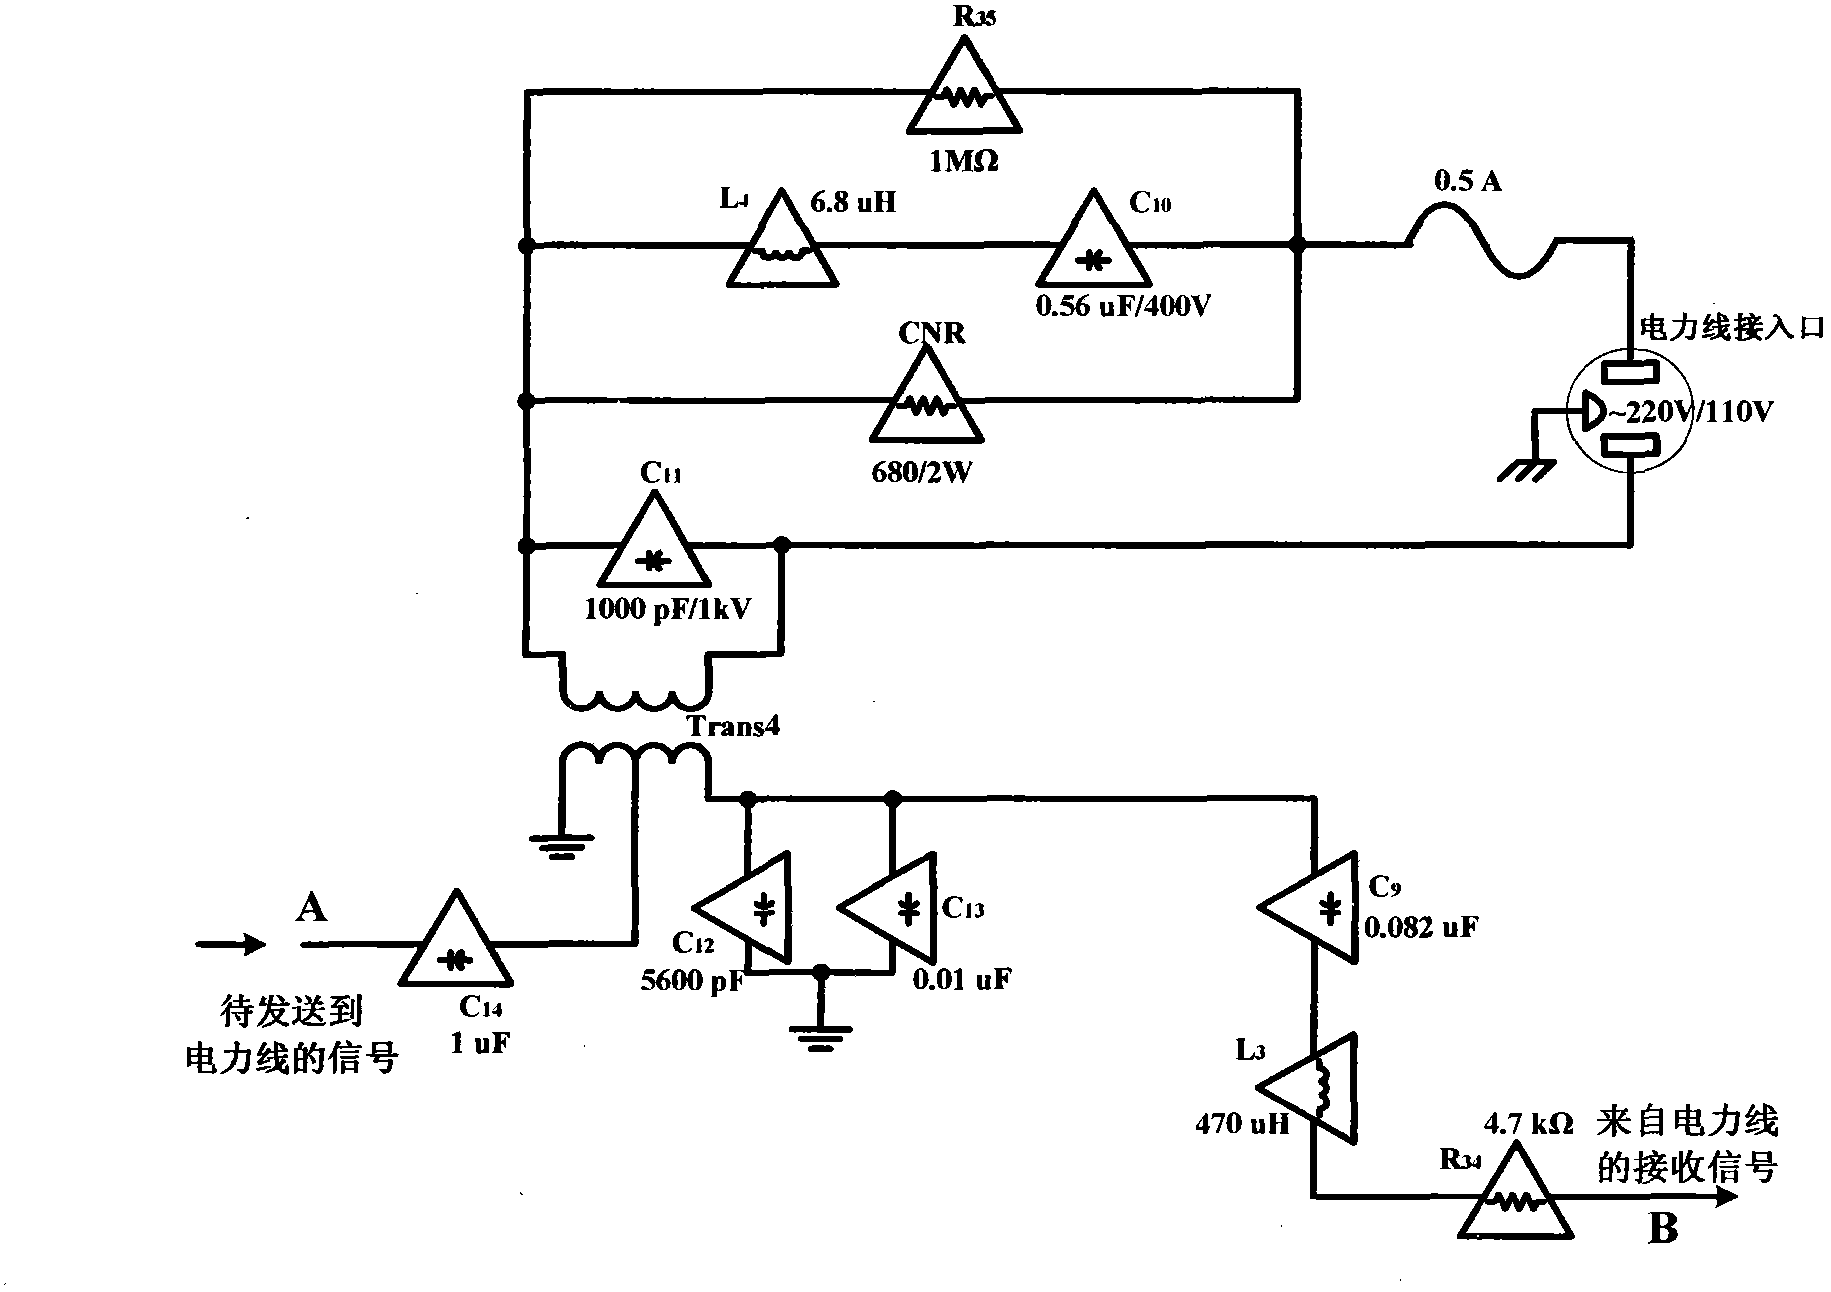 Power-line communication interference devices